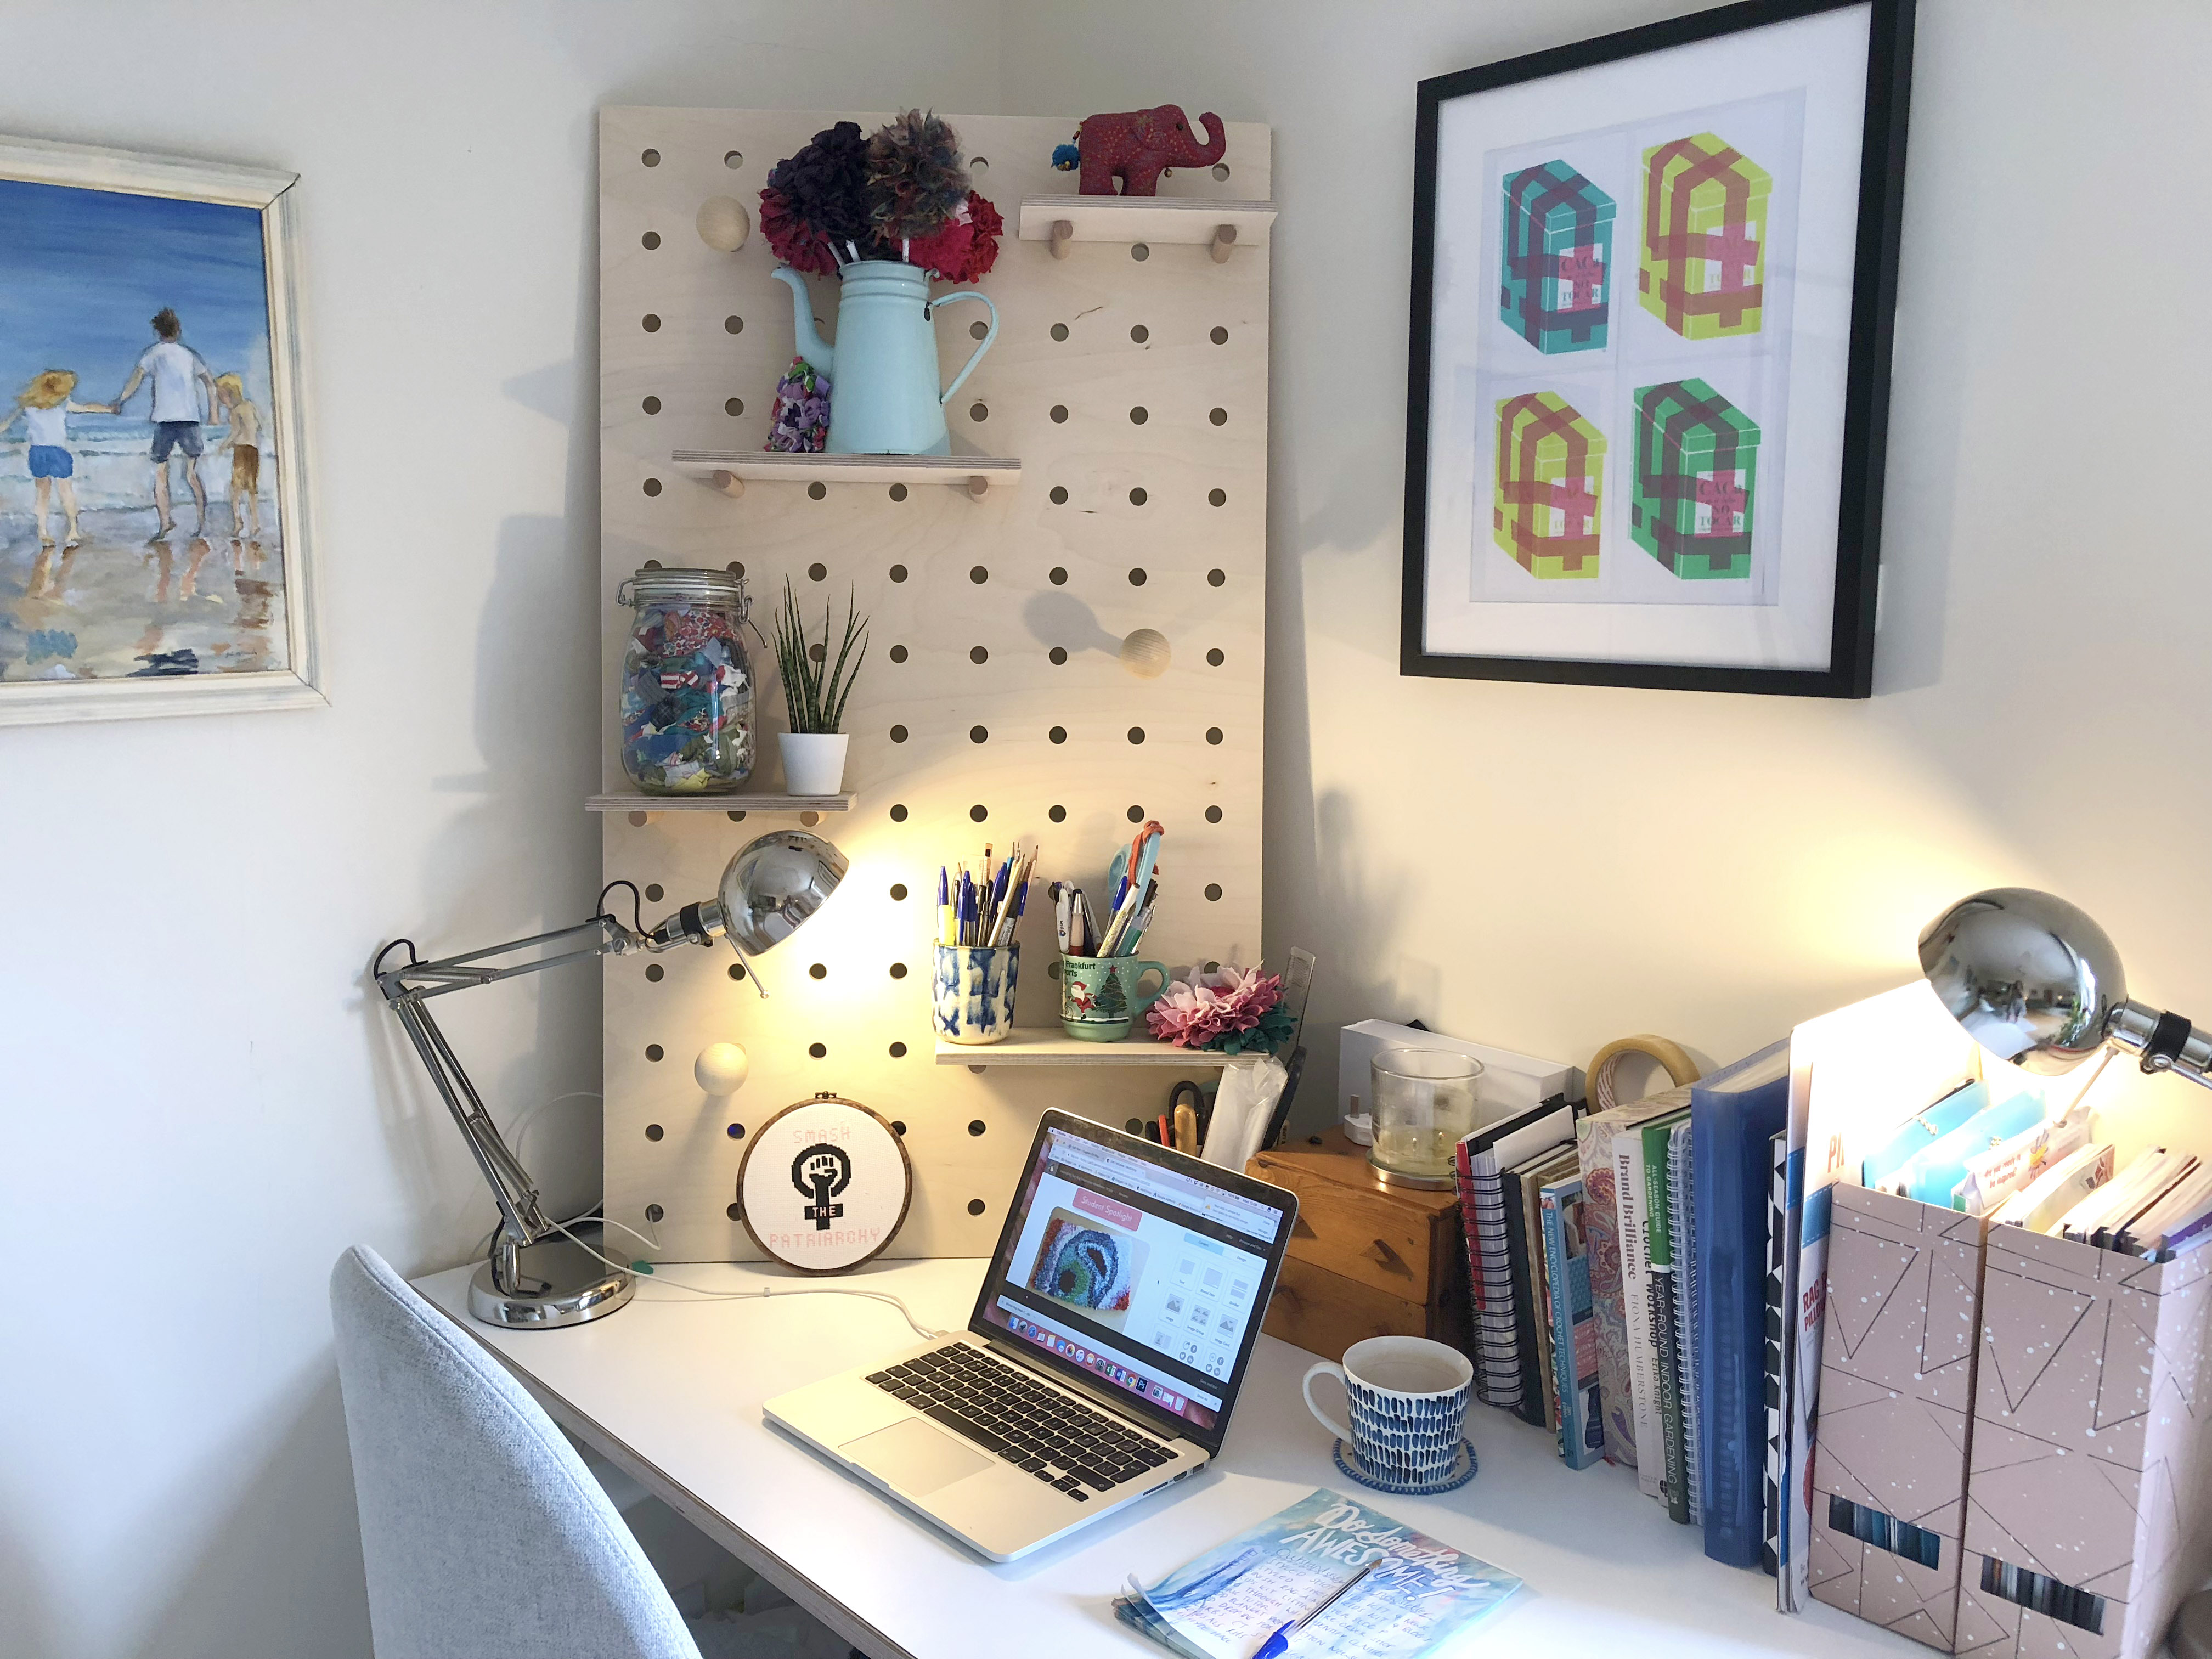 Cute home office with wooden peg board, macbook, art and plants